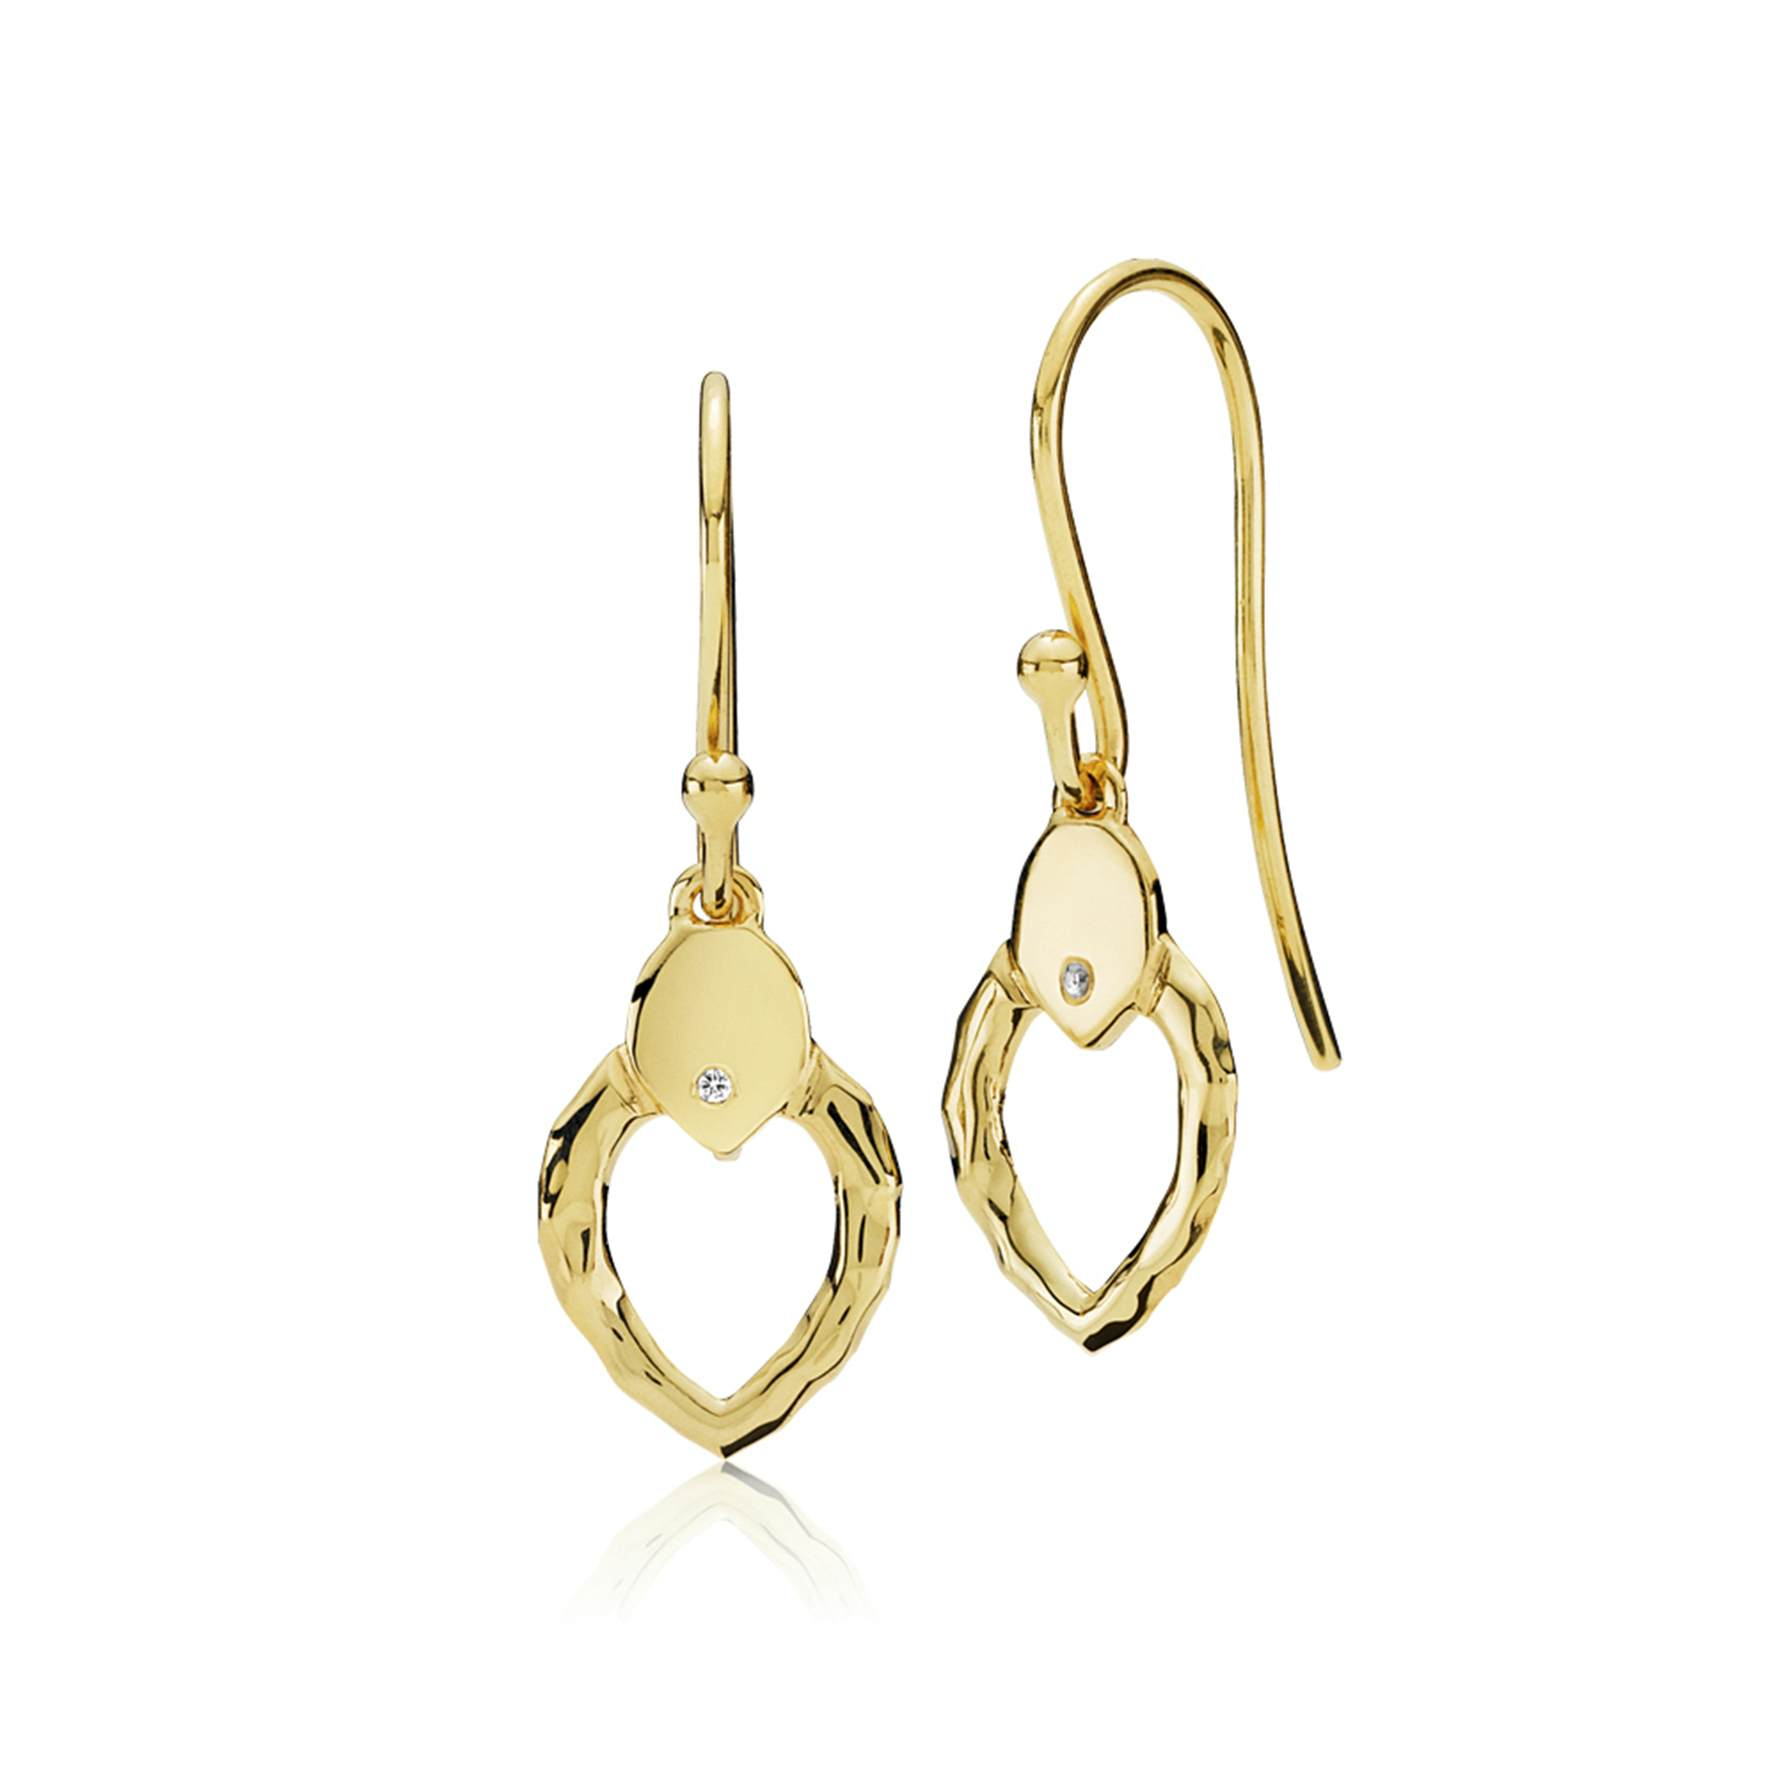 Cecilie Schmeichel Small Earrings from Izabel Camille in Goldplated-Silver Sterling 925